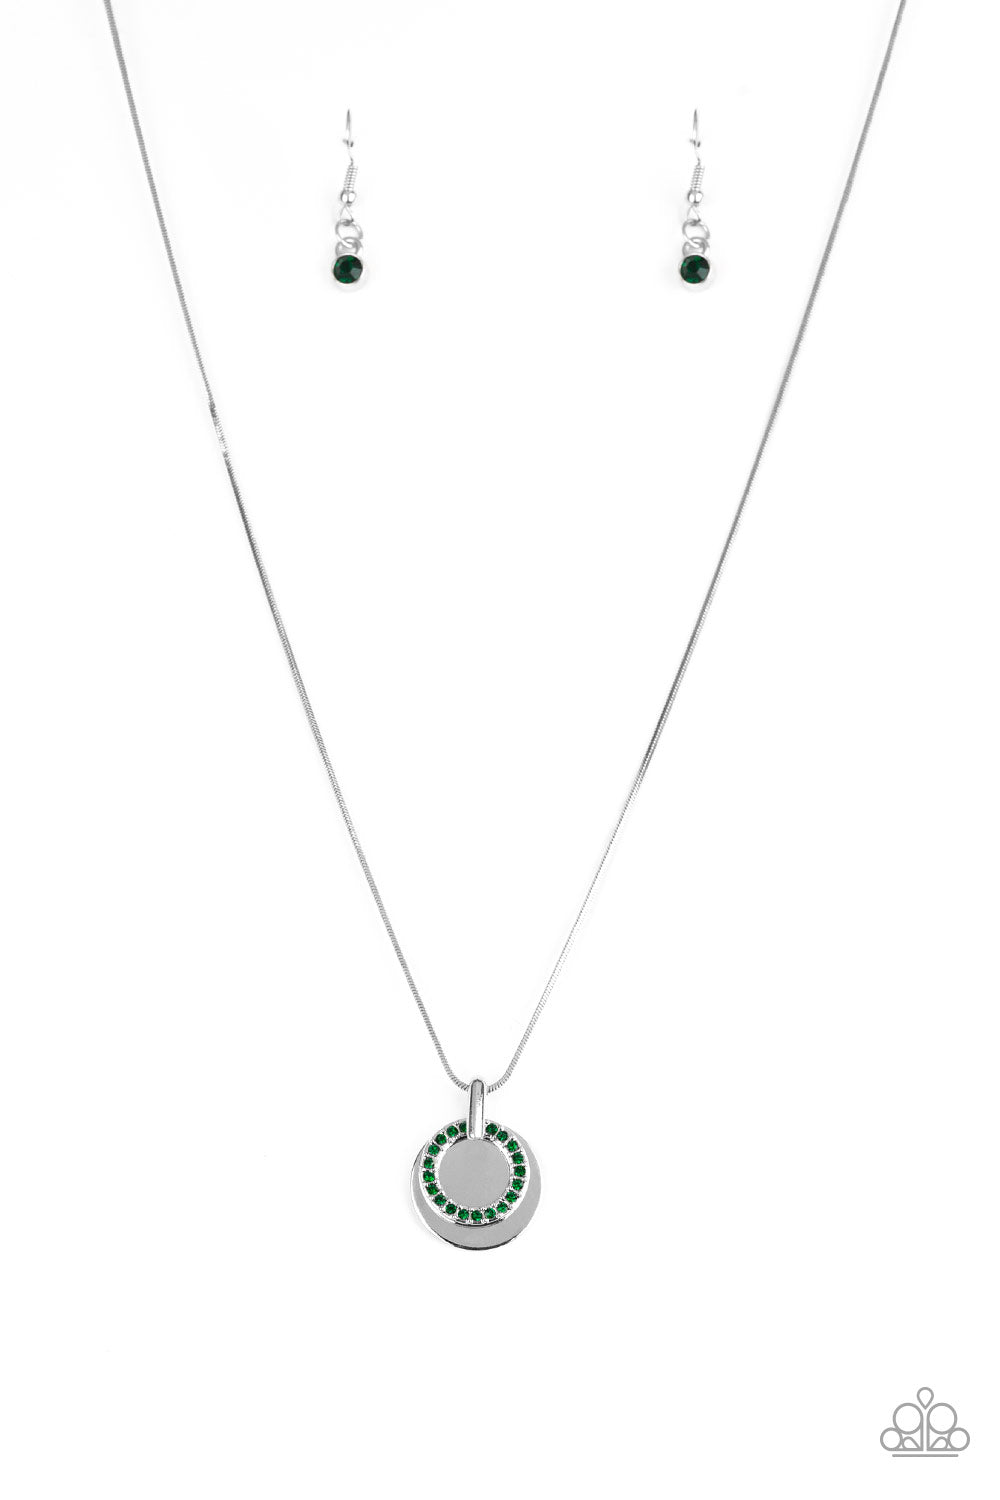 Paparazzi Necklace - Front and CENTERED - Green